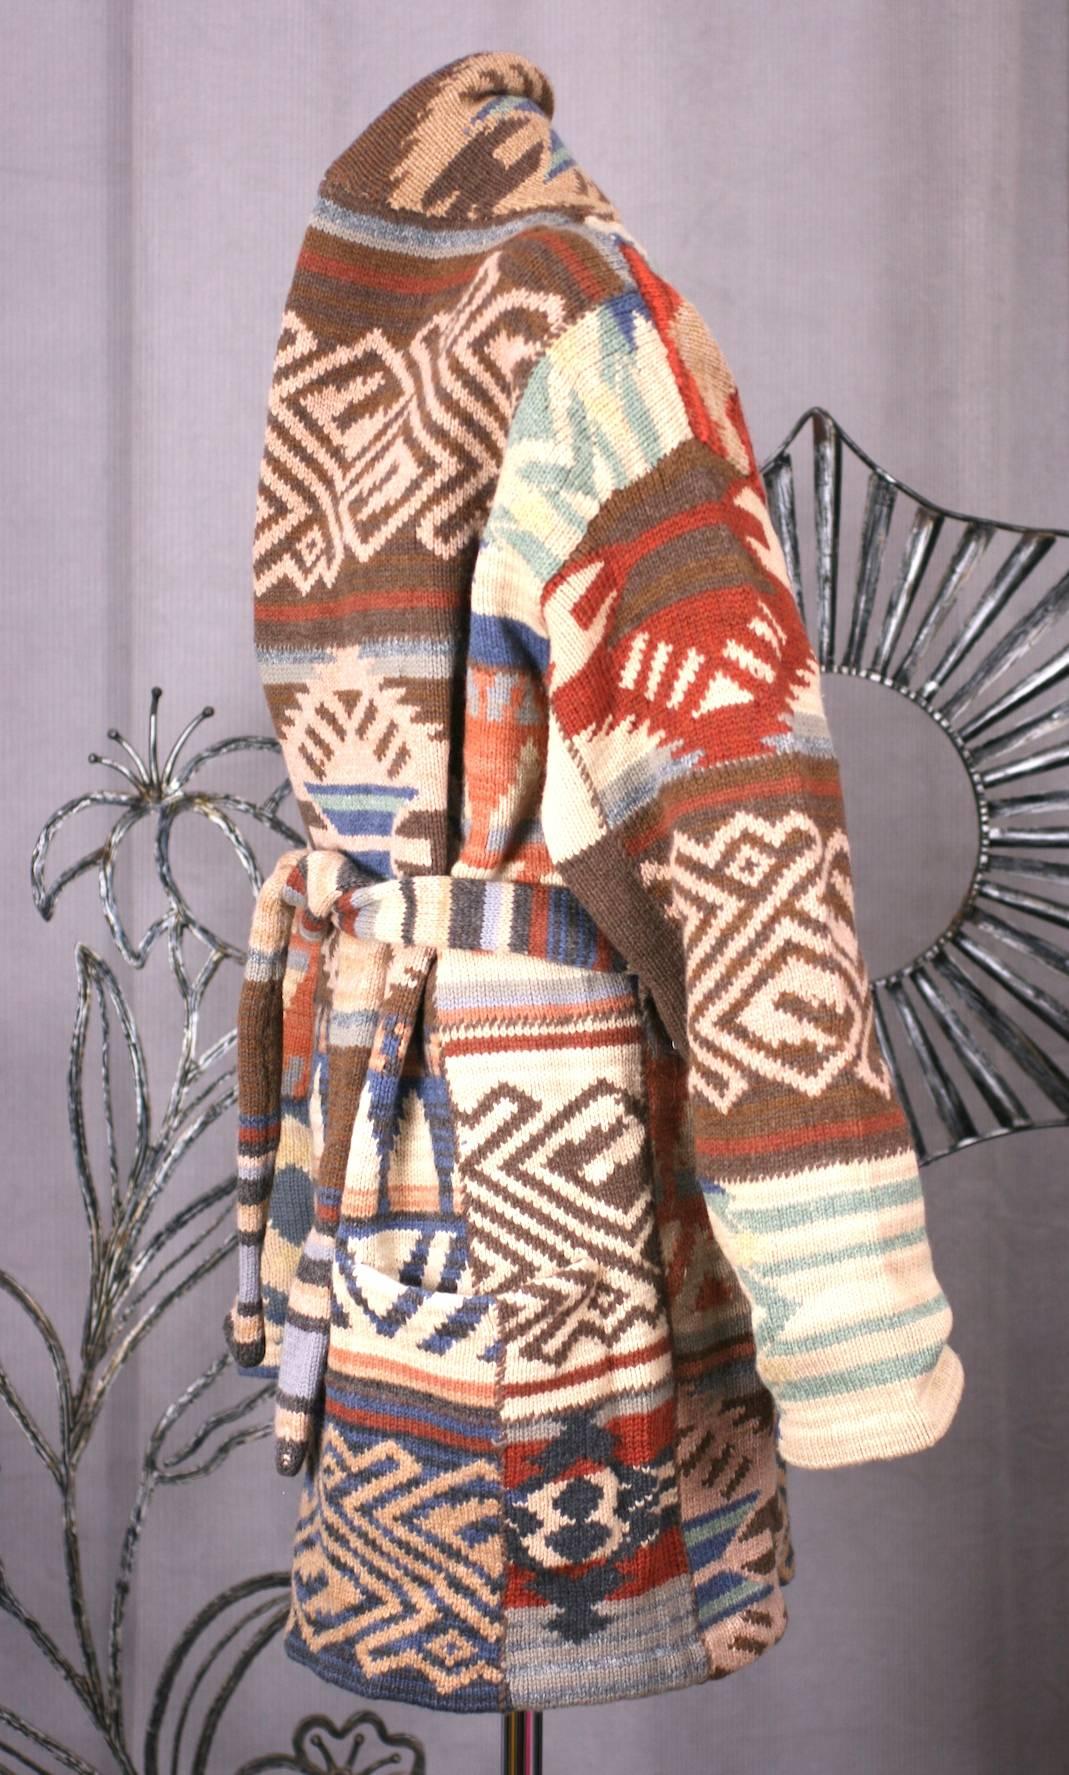 Oversized Hand knit wrap cardigan with self tie belt in lambswool with alpaca from Lauren. Navajo patterned motifs throughout. Warm and versatile outer wear piece. 
Length 33